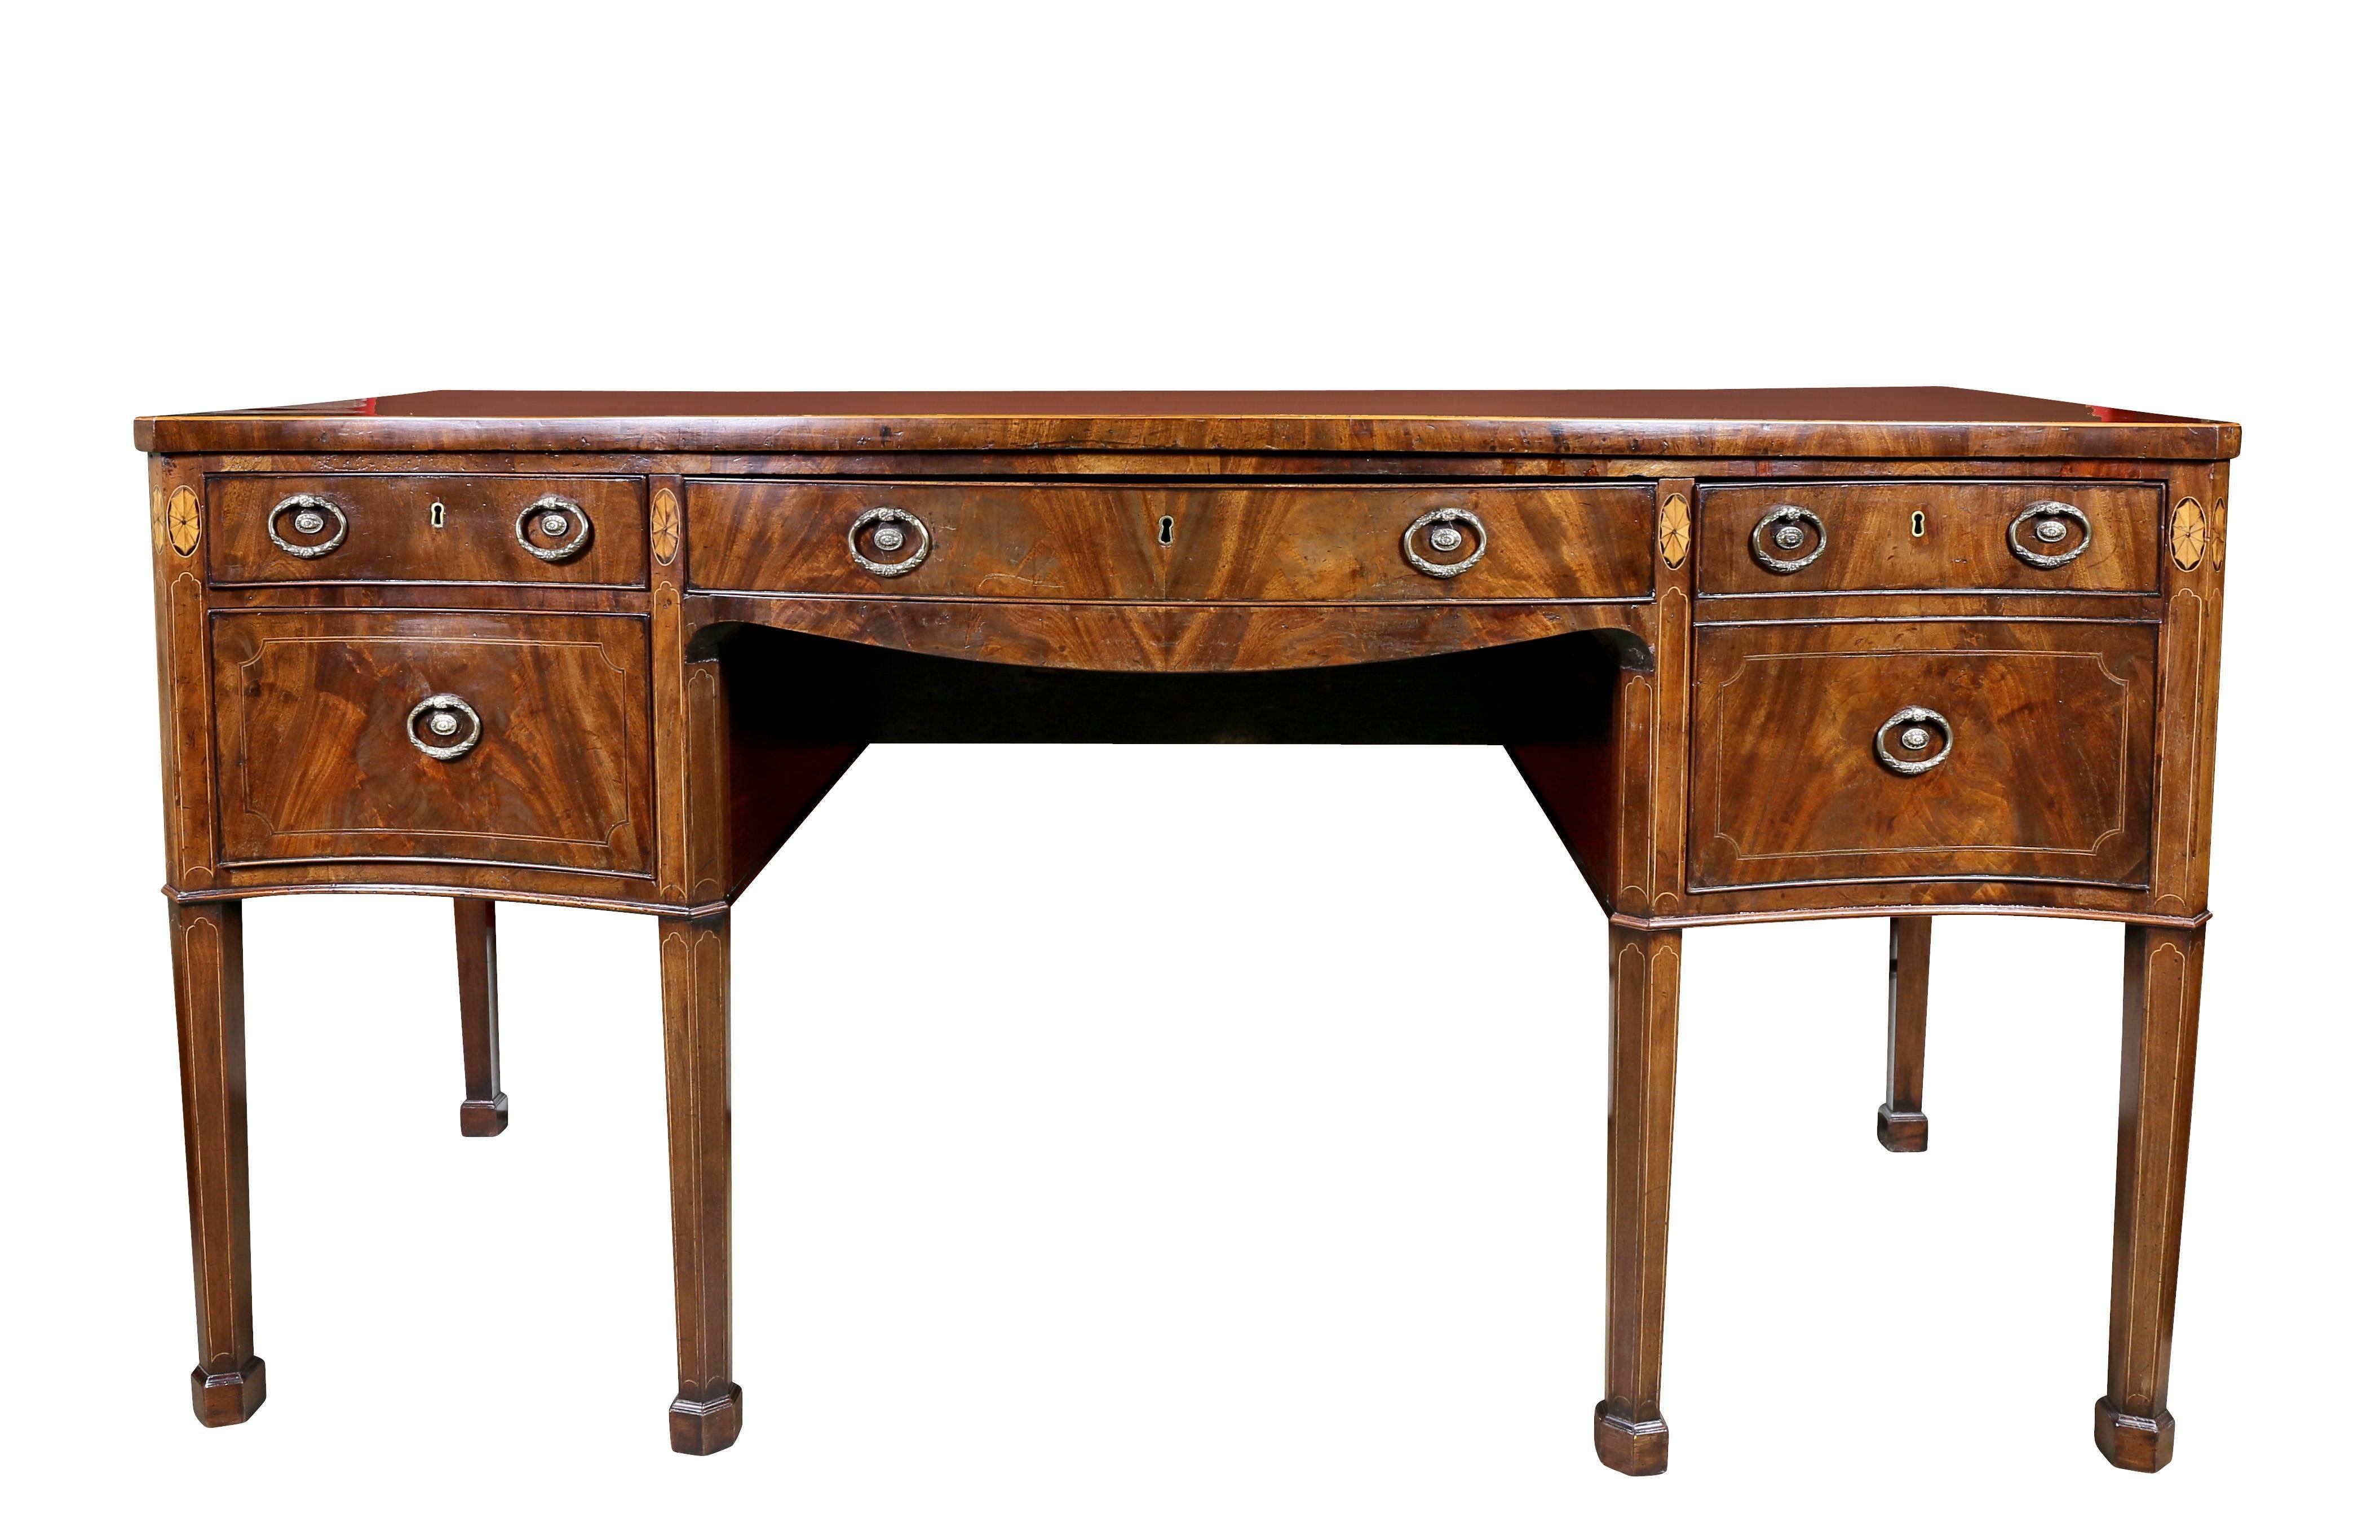 Serpentine shaped rectangular top over a central drawer flanked by two deep drawers , the sides with false drawers with one working drawer, raised on square tapered legs headed by paterae, block feet. Probably by Gillows of Lancaster. Top shows